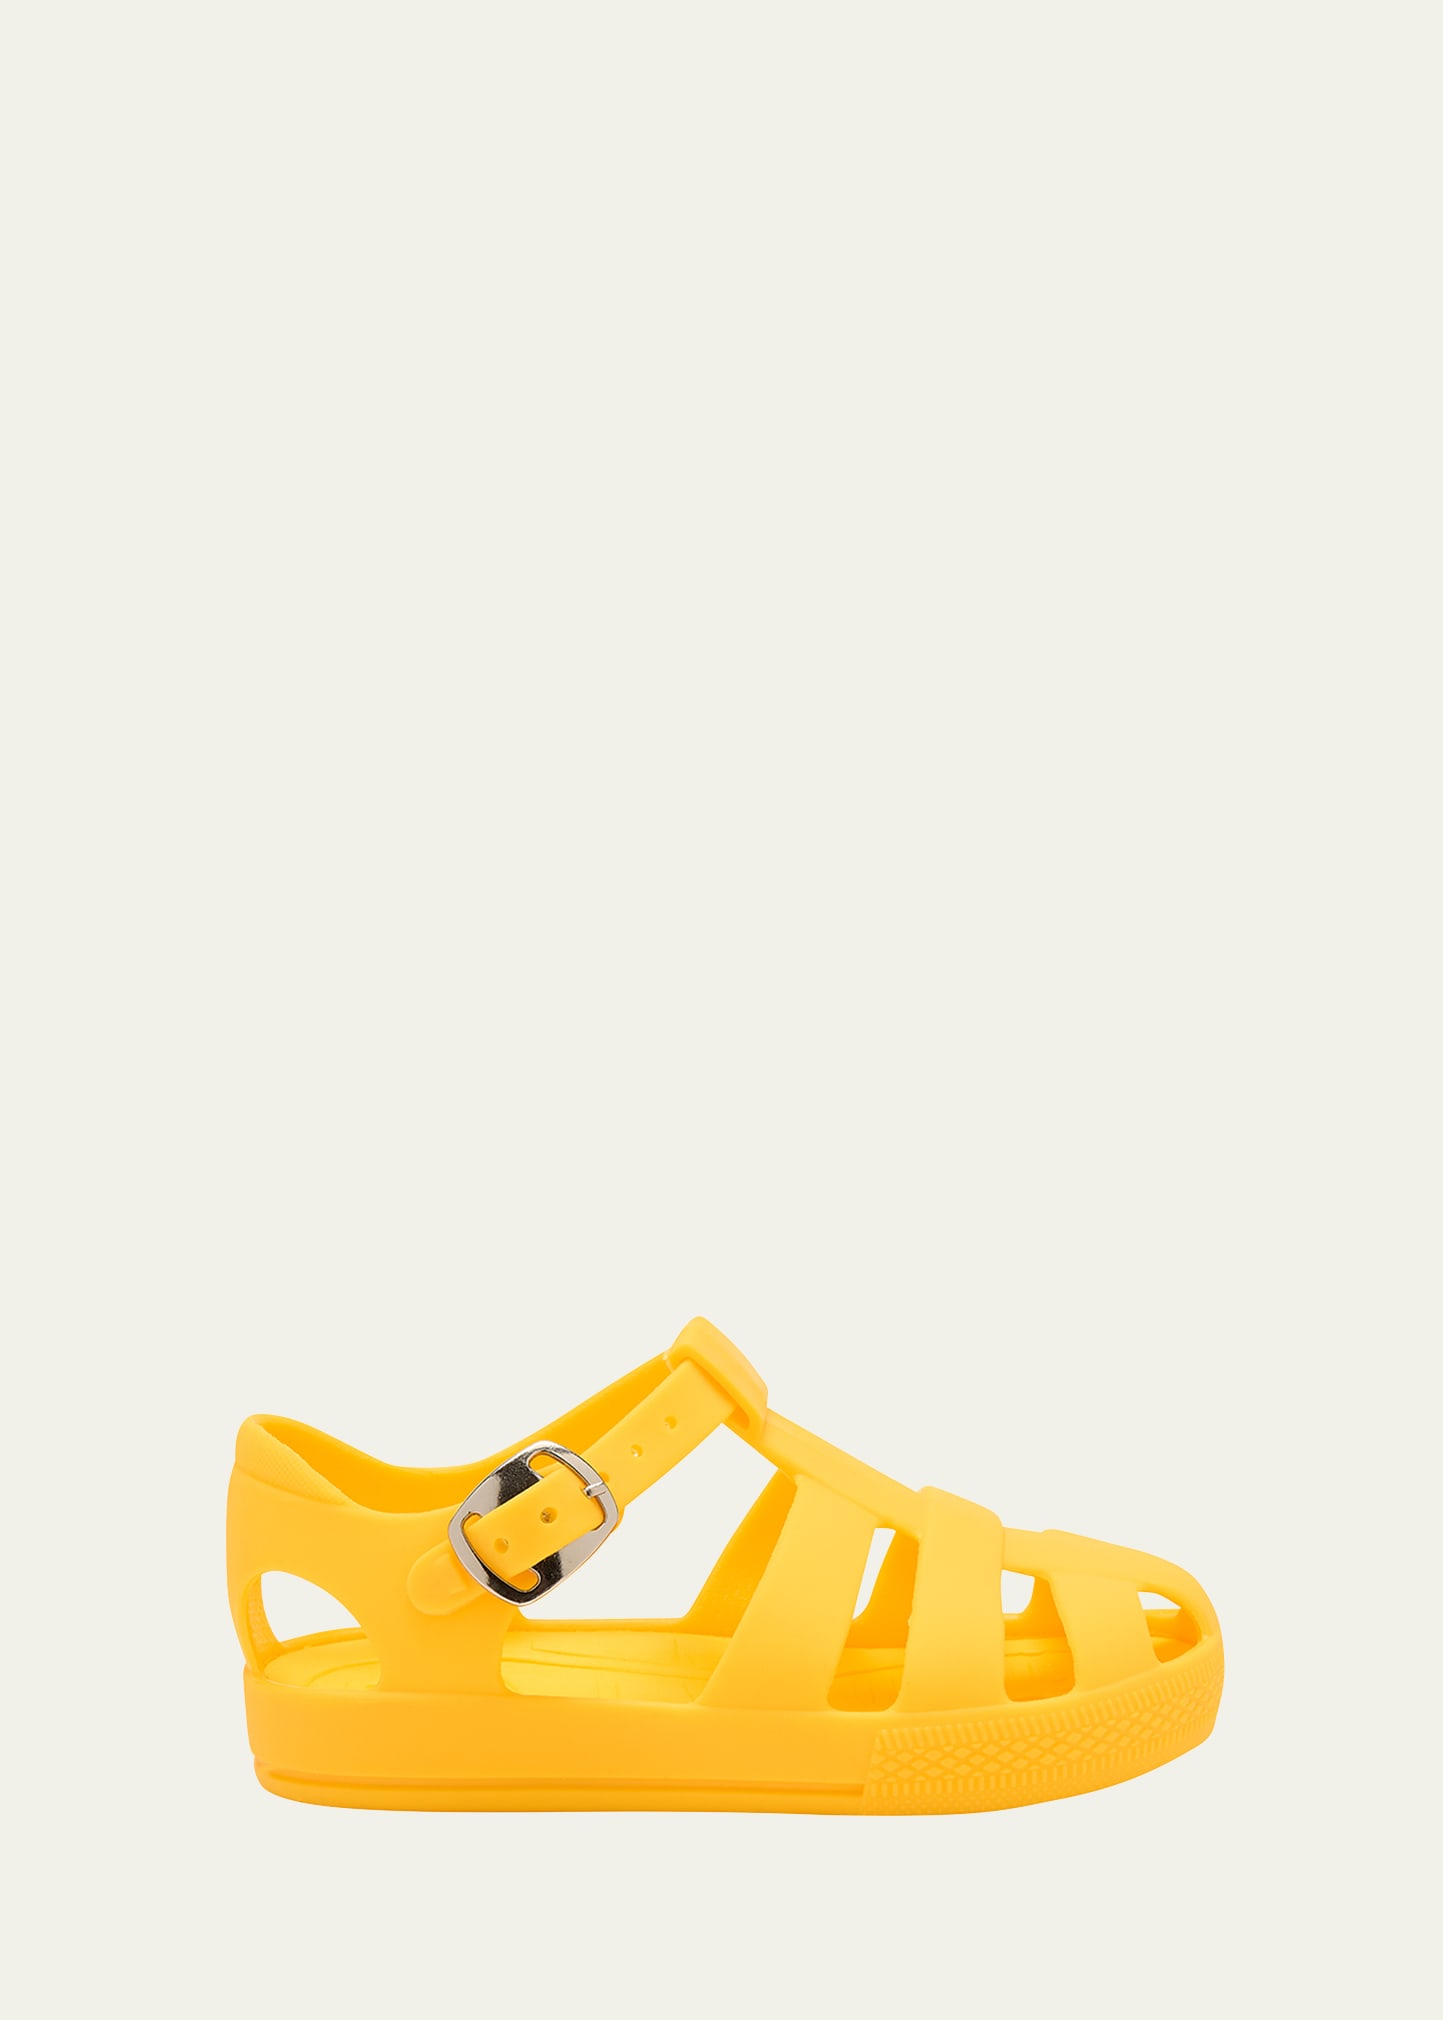 Bonniemob Kid's Jelly Shoes, Toddlers In Yellow